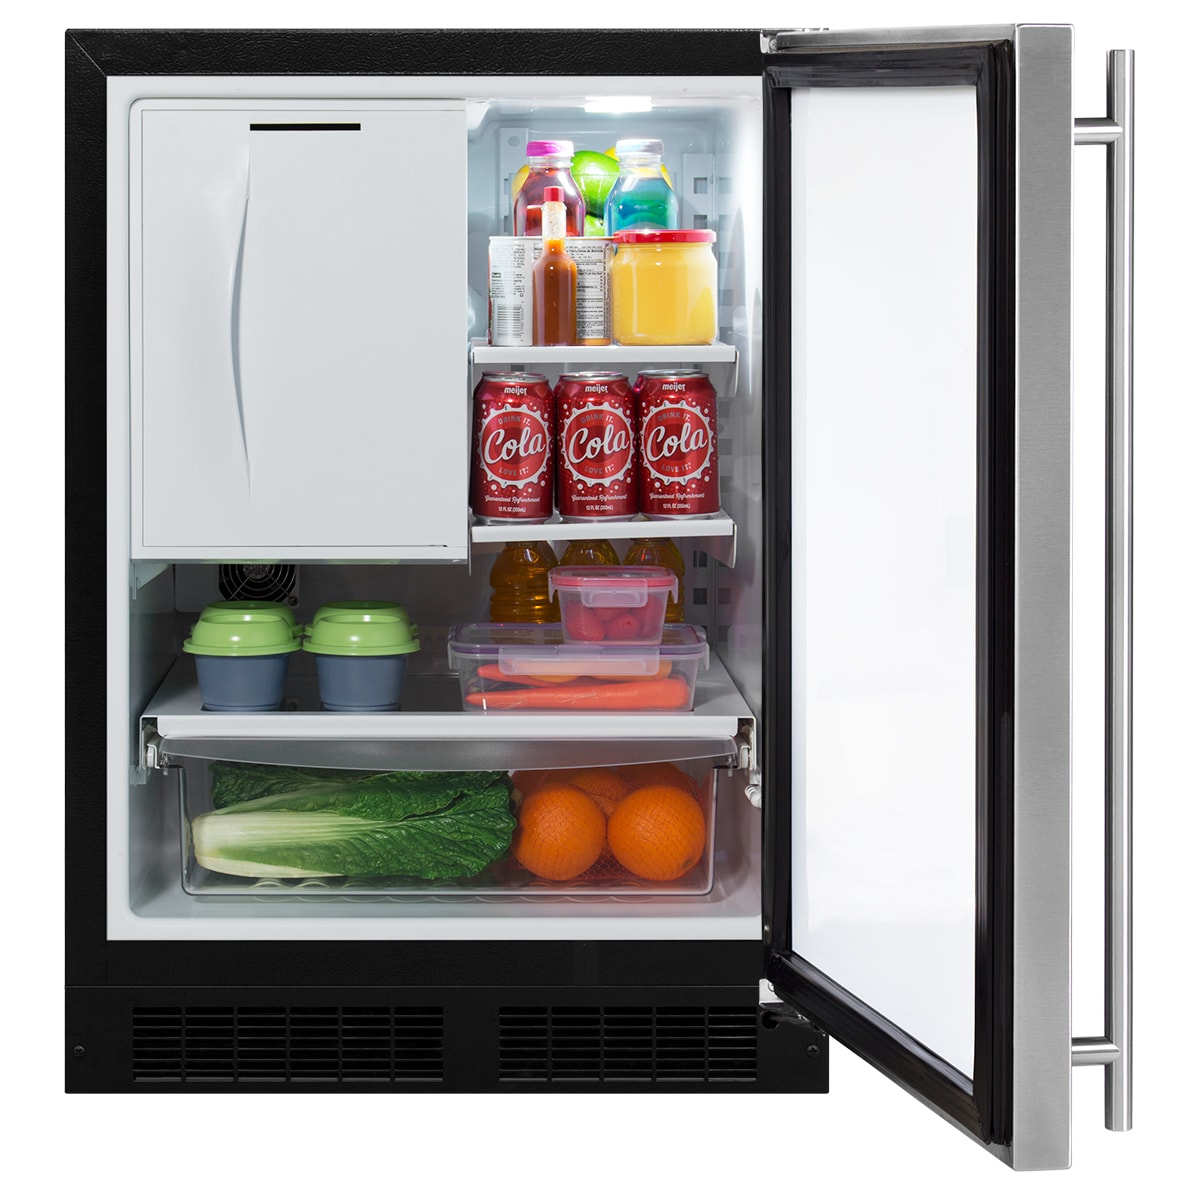 ROOMWELL E-Star 3.3 Cu Ft Mini Fridge without Freezer - AUTO DEFROST,  Reversible Single Door, Glass Shelf Refrigerator - A Space-Saving Marvel  for